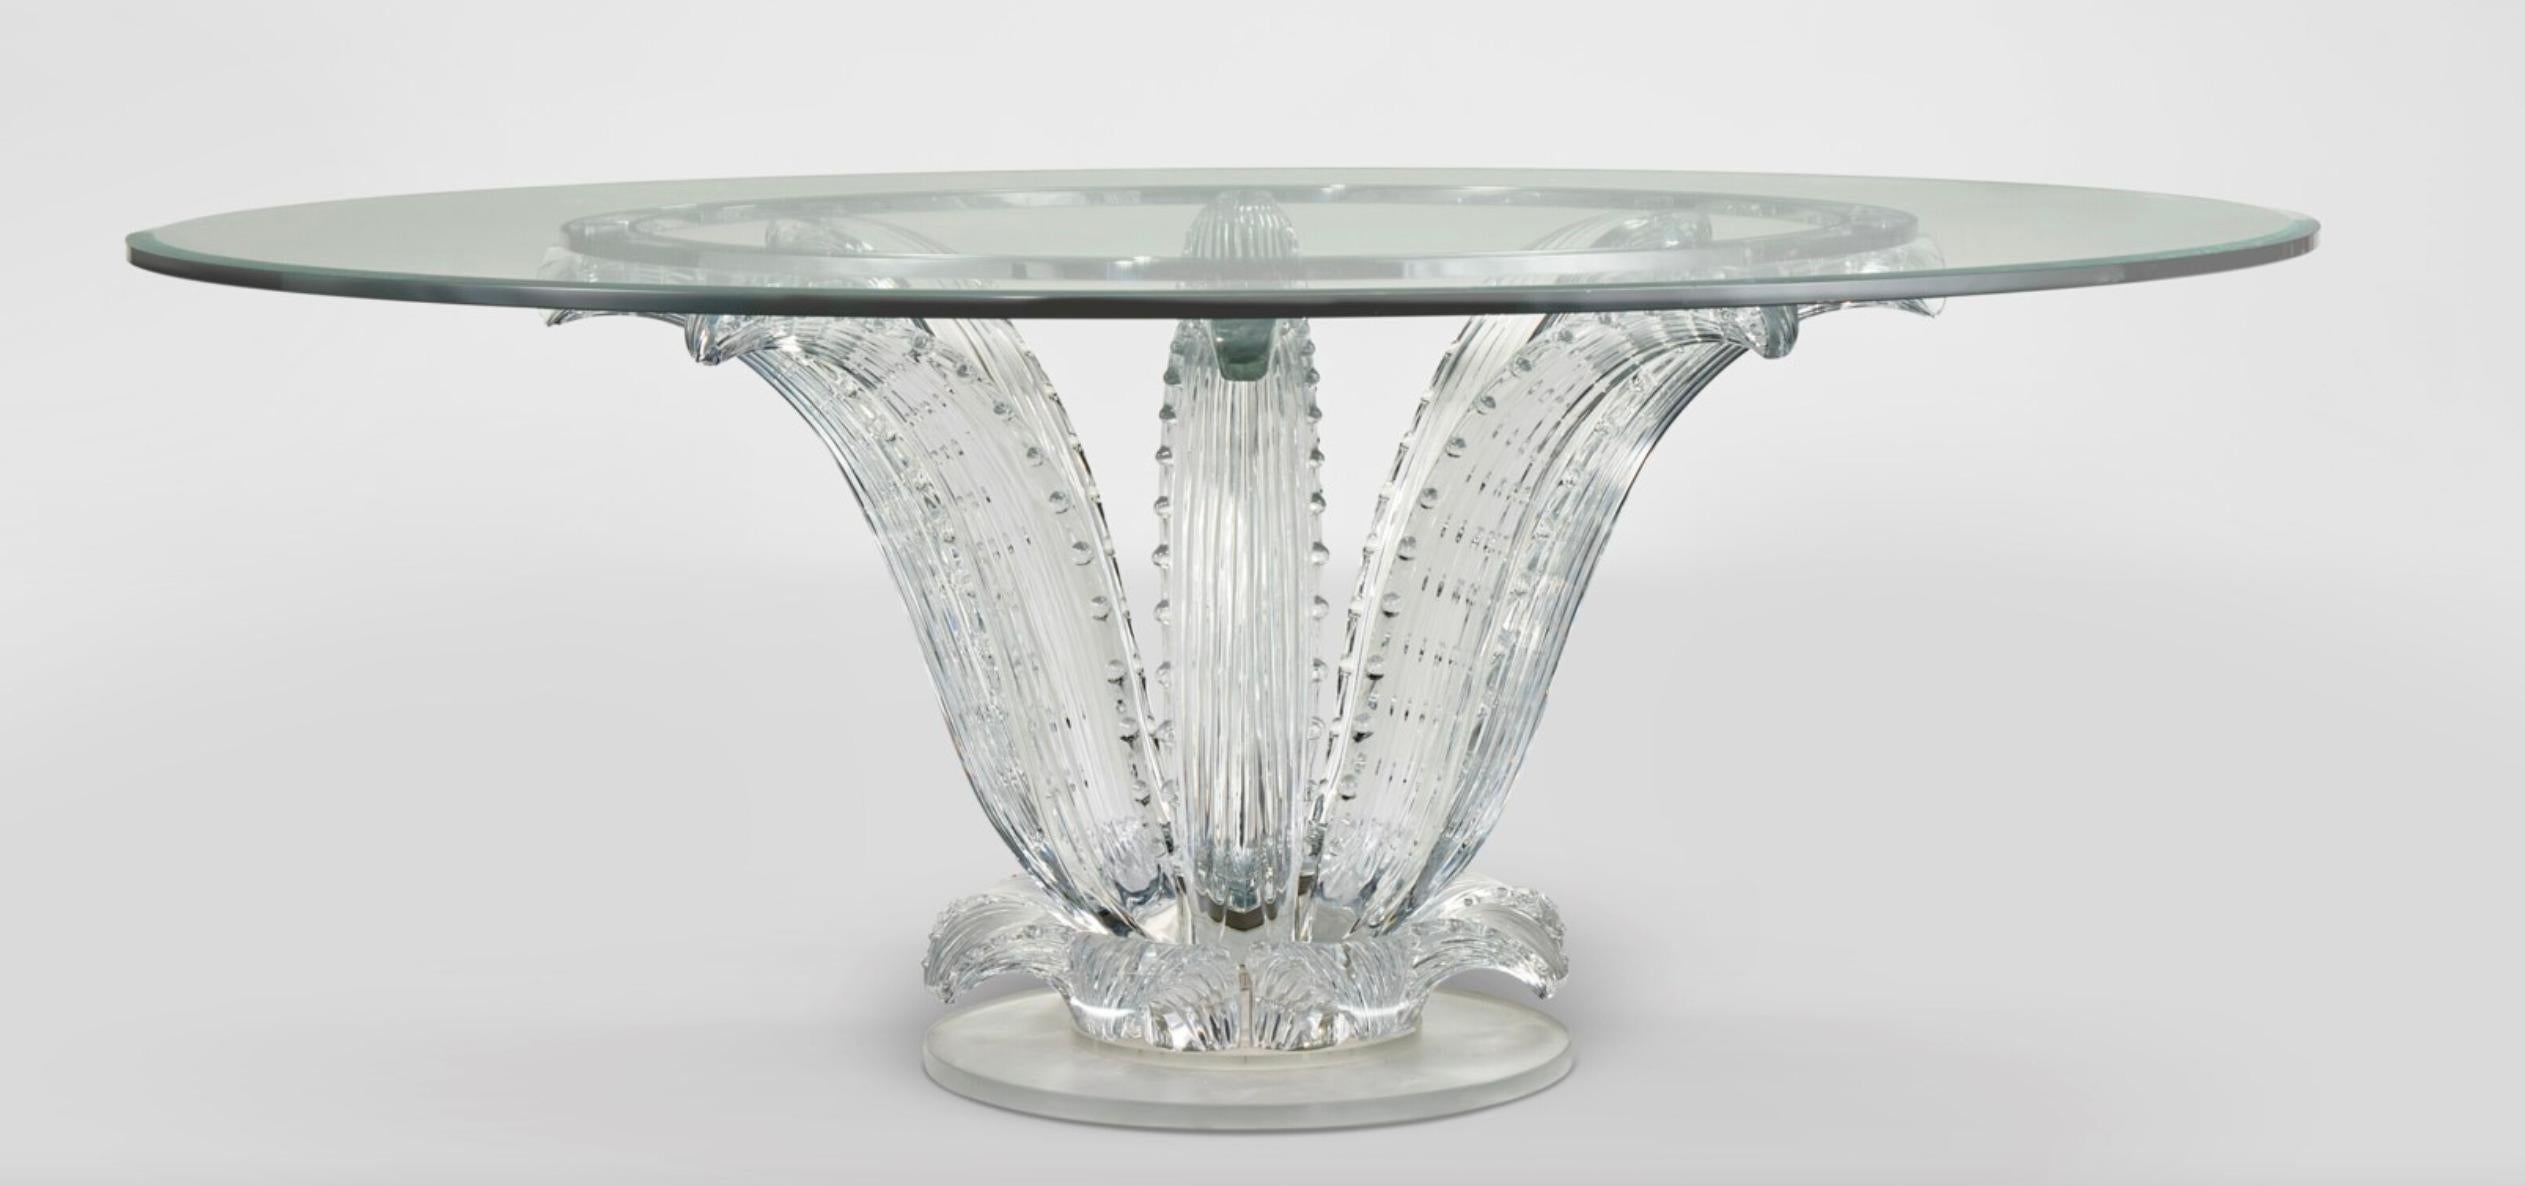 Lalique France, A Magnificent and Large Crystal Cactus Table, circa 1990

